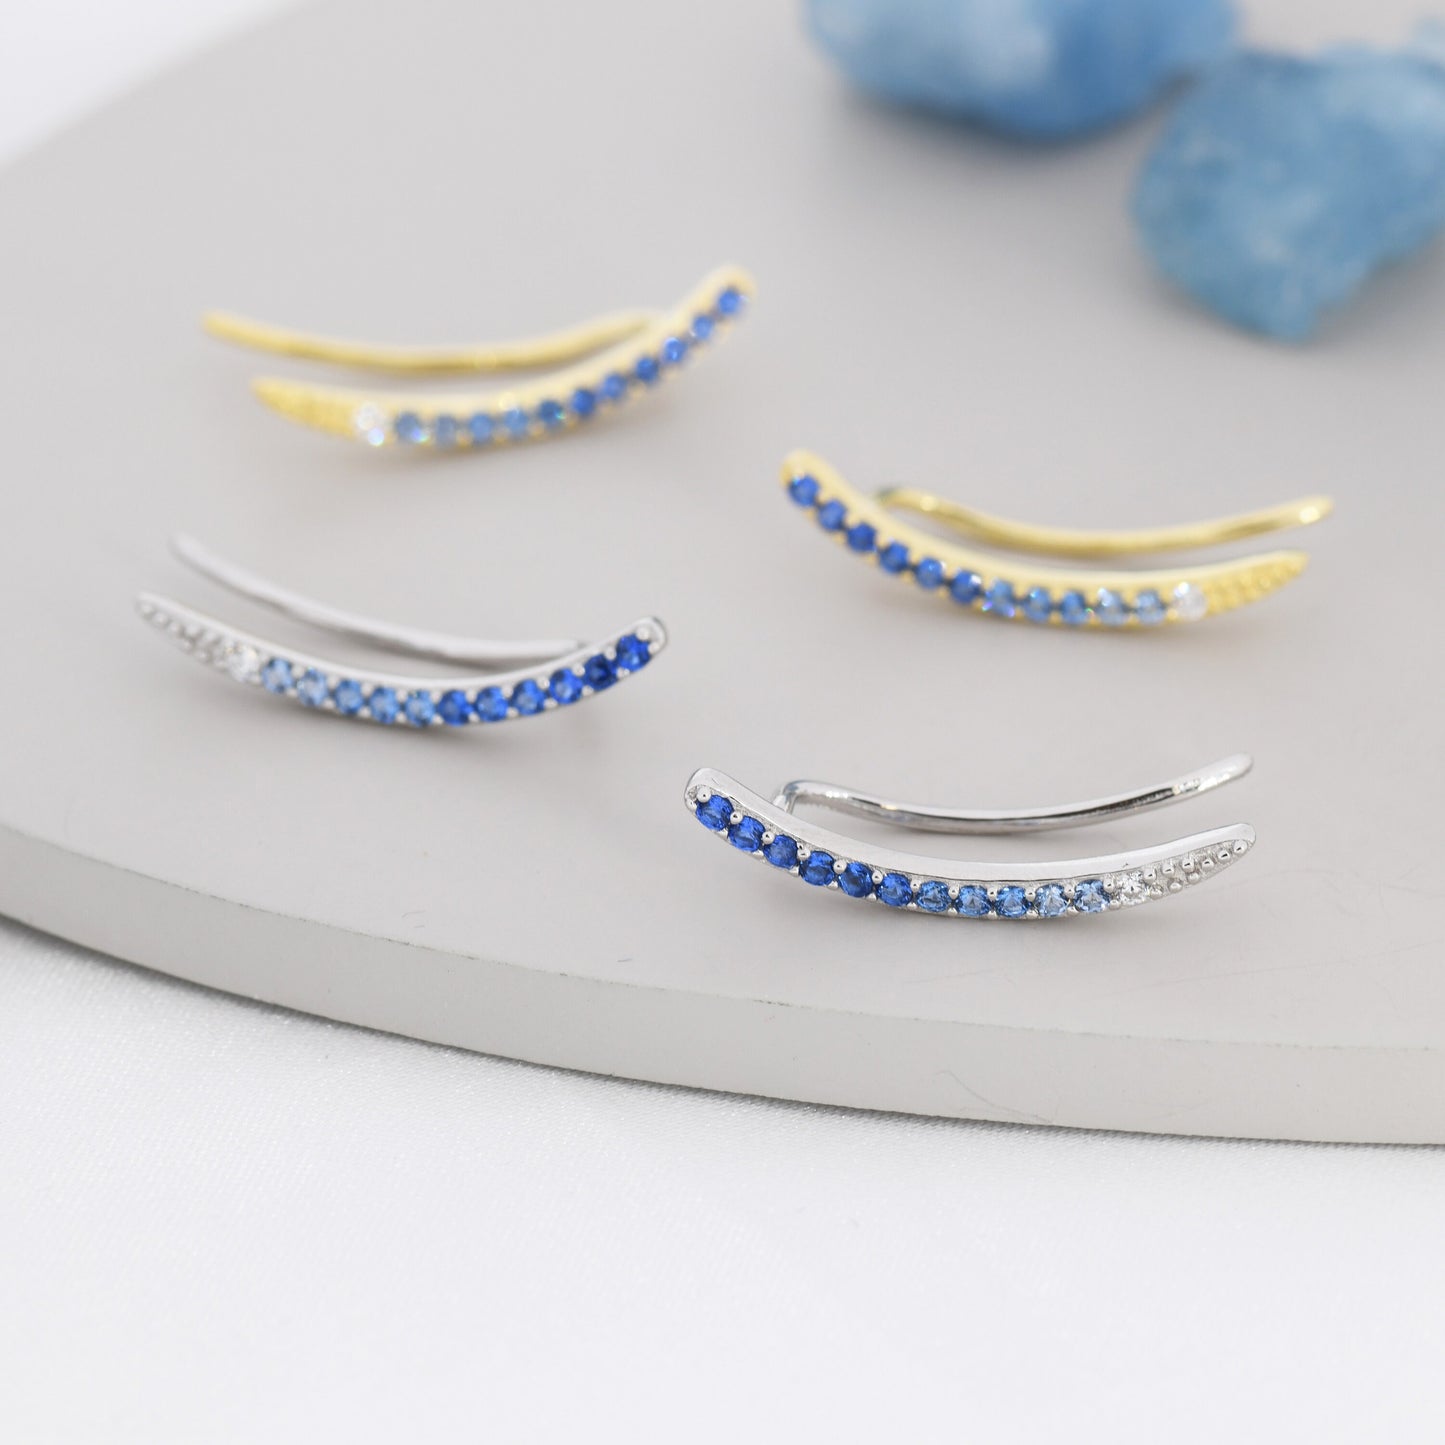 Ombre Sapphire Blue CZ Crawler Earrings in Sterling Silver, Silver or Gold, Gradient Colour Ear Crawlers, September Birthstone Ear Climbers